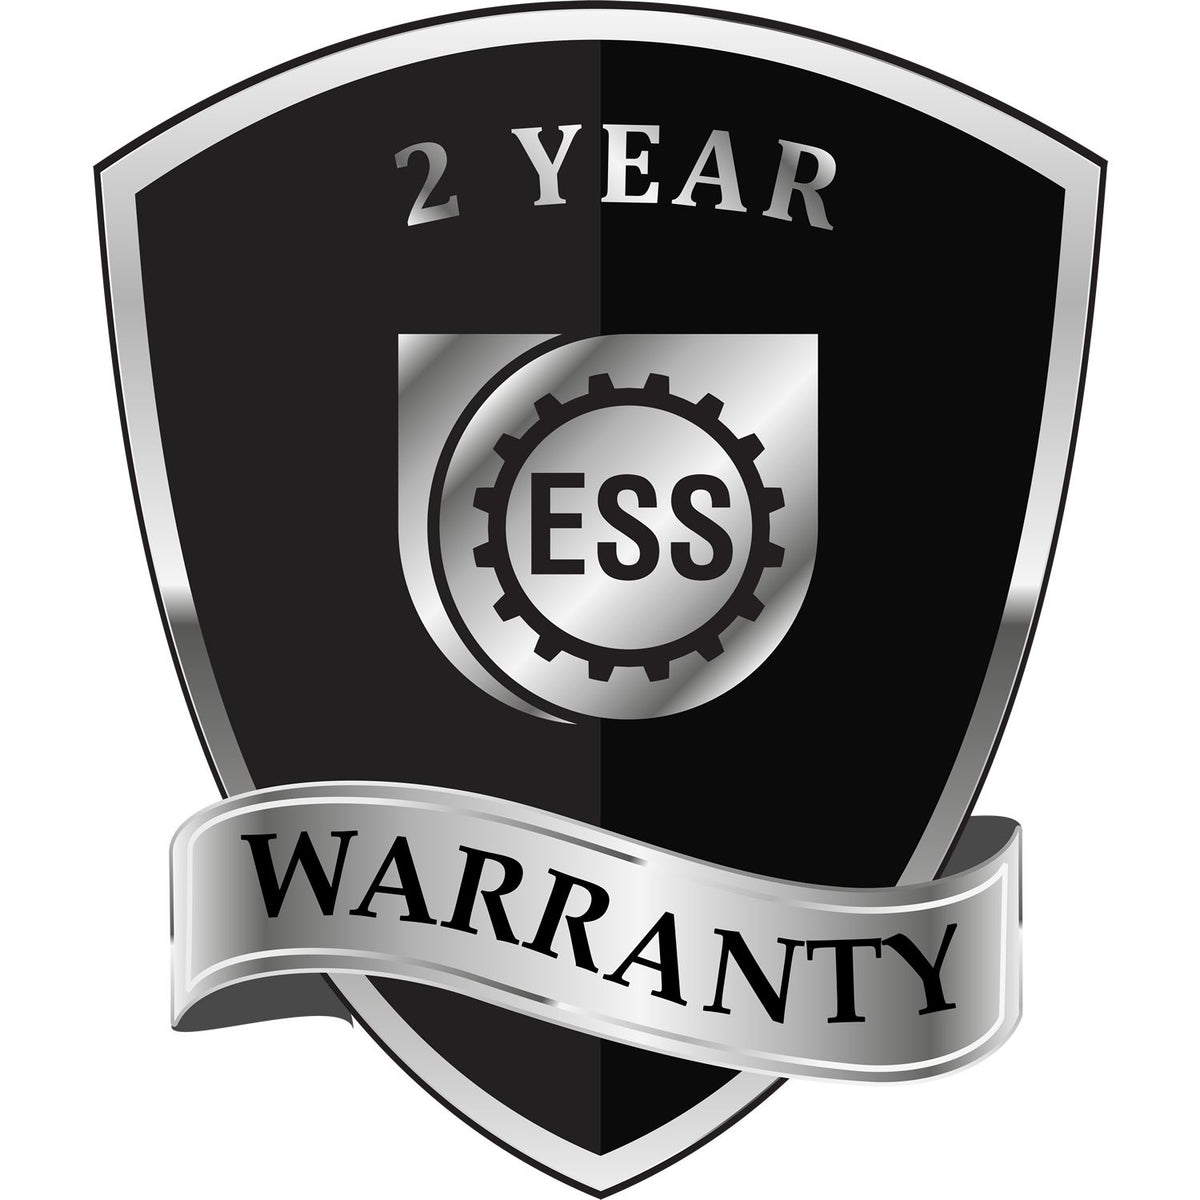 A badge or emblem showing a warranty icon for the Heavy Duty Cast Iron Colorado Land Surveyor Seal Embosser